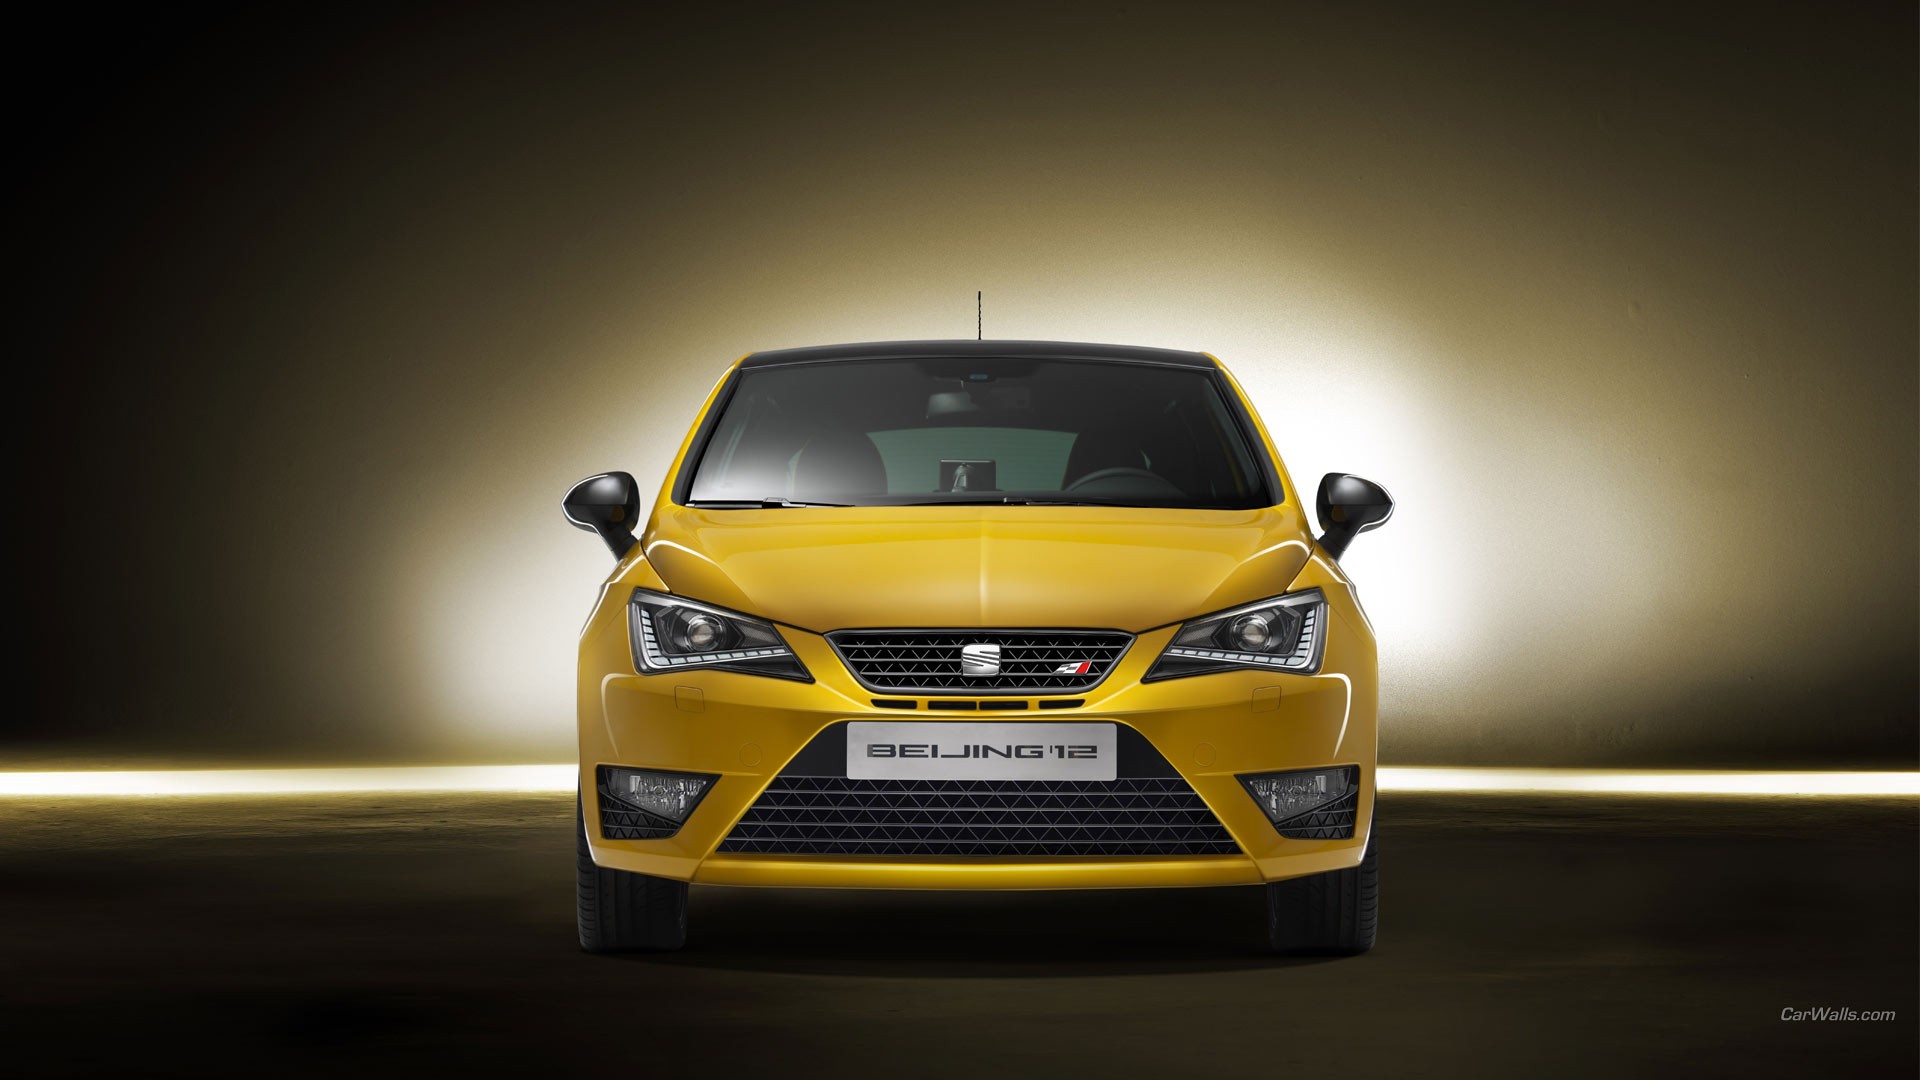 General 1920x1080 Seat Ibiza car concept cars yellow cars seat vehicle Volkswagen Group Spanish cars hatchbacks